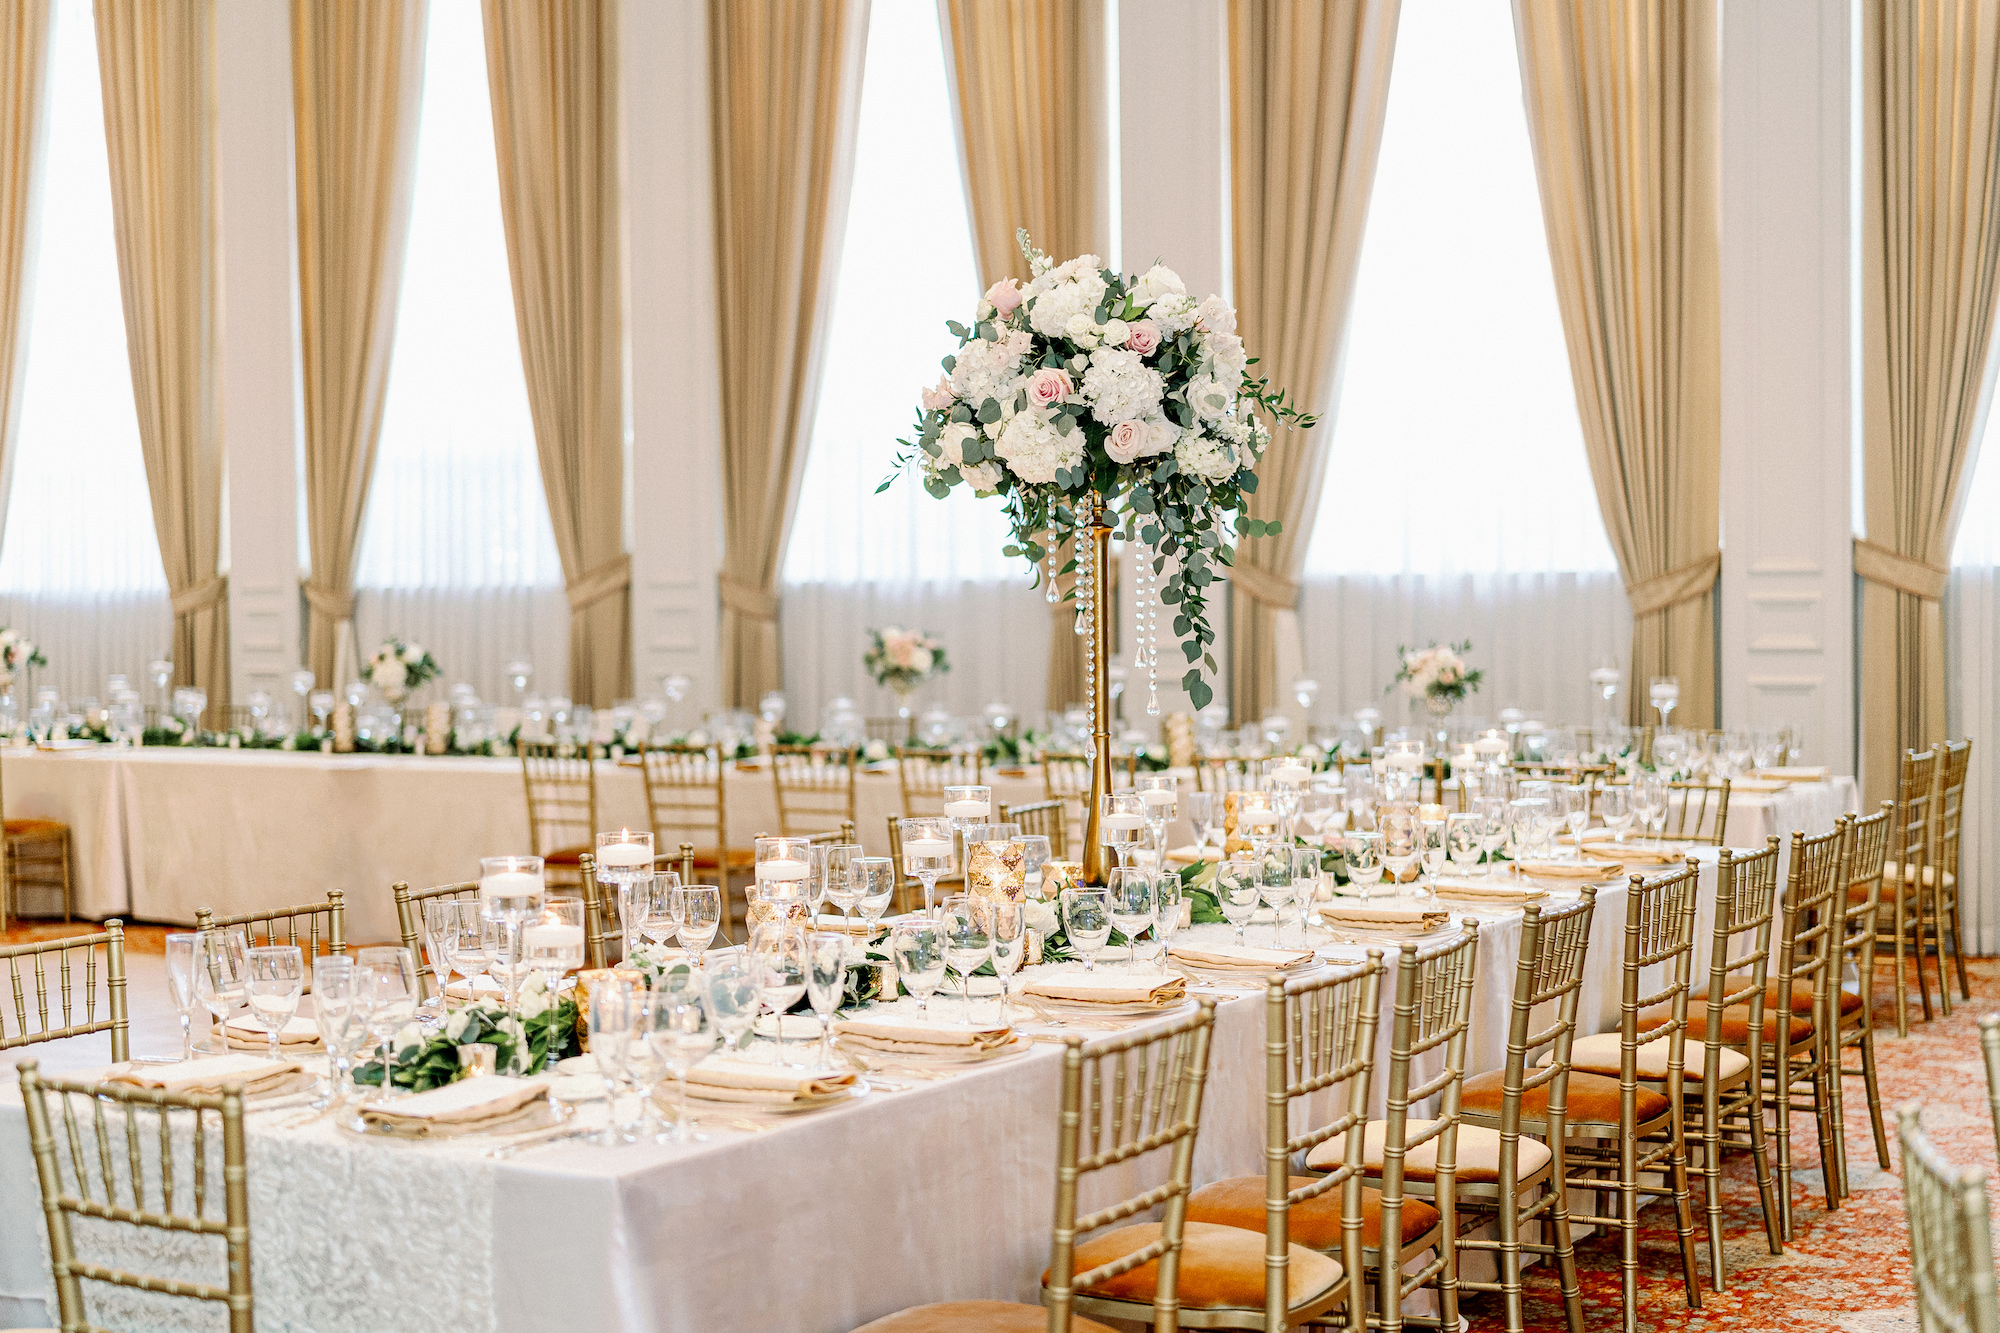 Elegant Gold Wedding Inspiration | Tall Crystal Flower Stand Centerpieces | Gold Chiavari Chairs | Tampa Bay Florist Monarch Events and Design | Kate Ryan Event Rentals